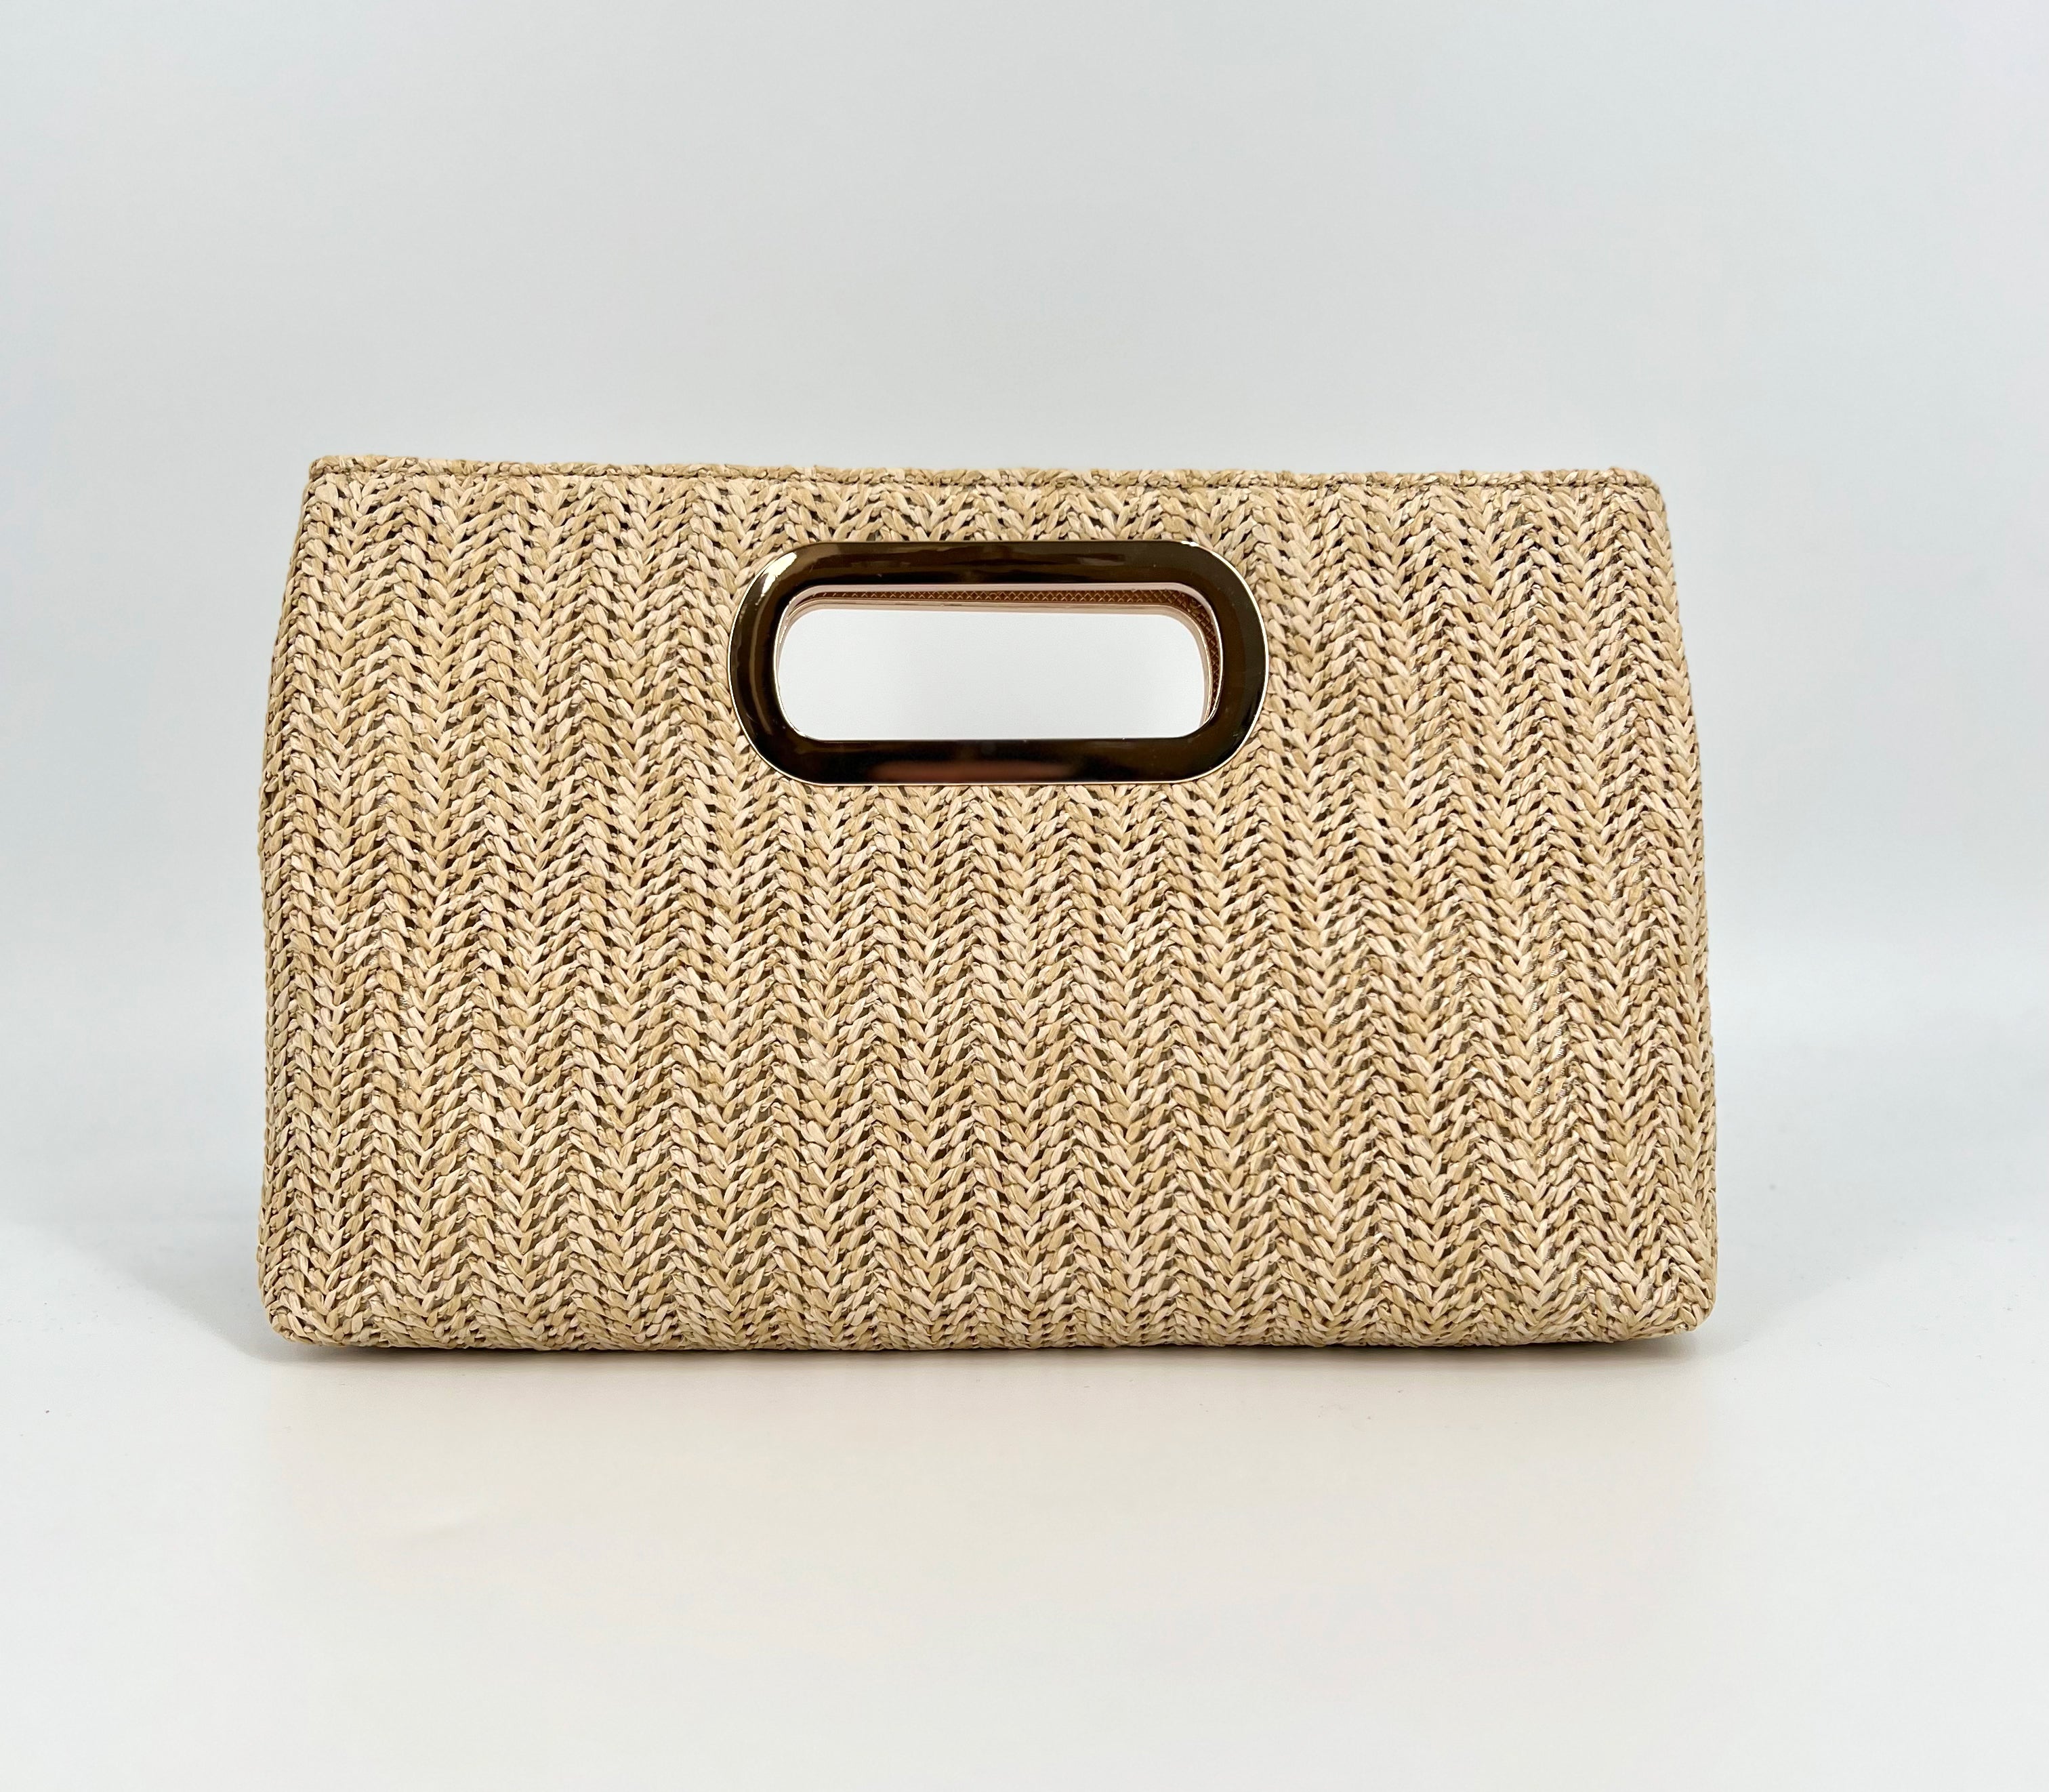 The Straw Handheld Clutch in Natural